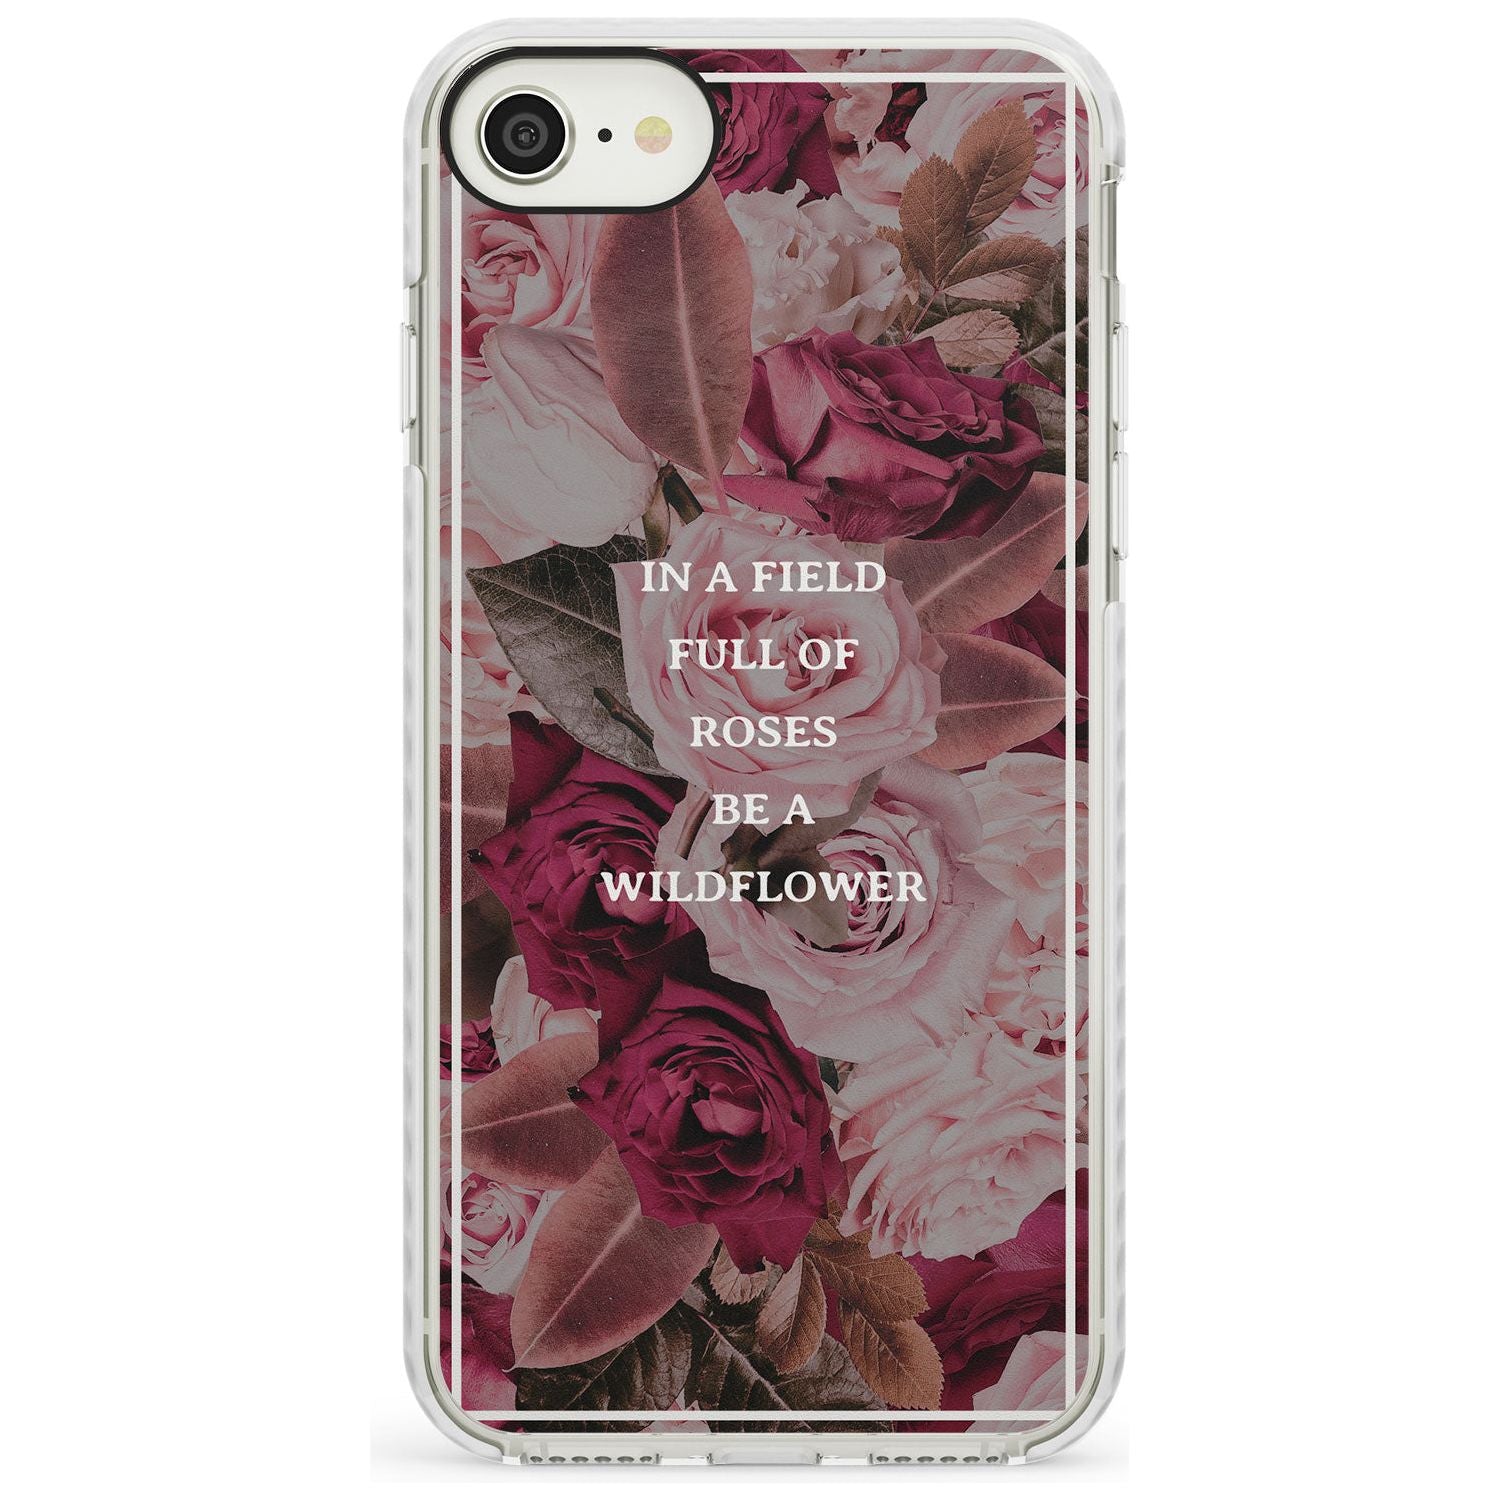 Be a Wildflower Floral Quote Impact Phone Case for iPhone SE 8 7 Plus